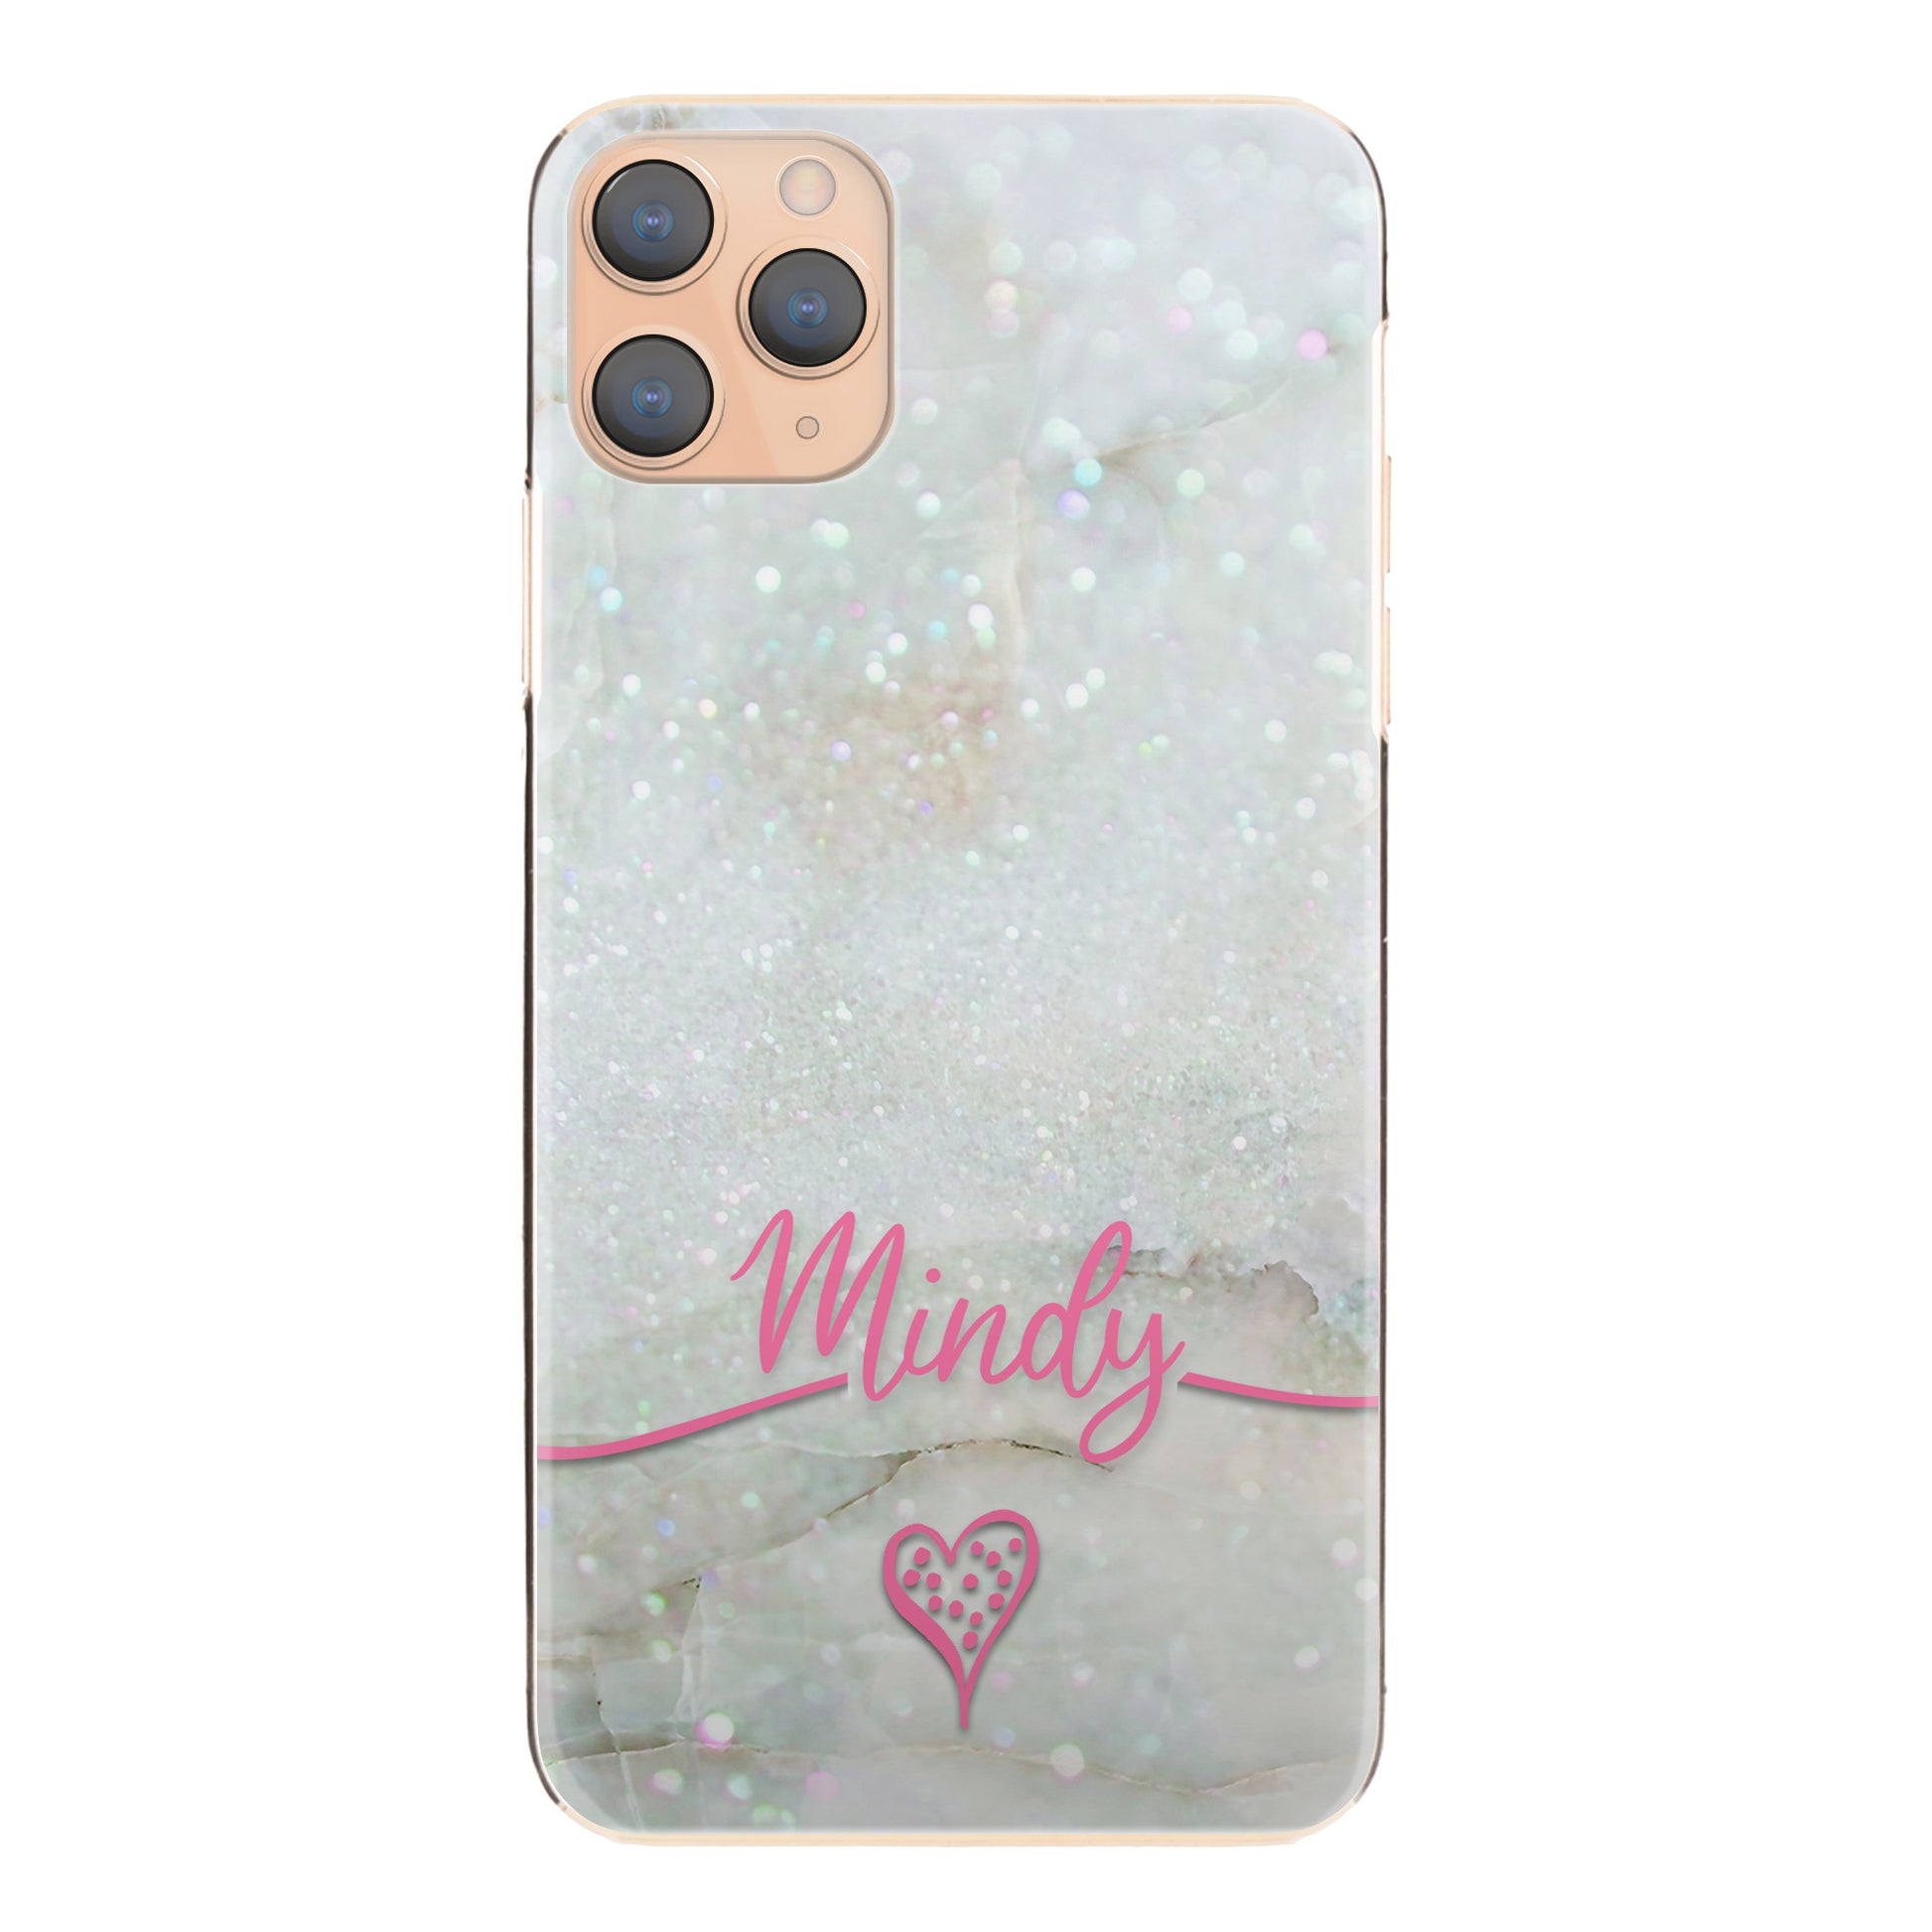 Personalised Oppo Phone Hard Case with Heart Accented Pink Text on Crystal Marble